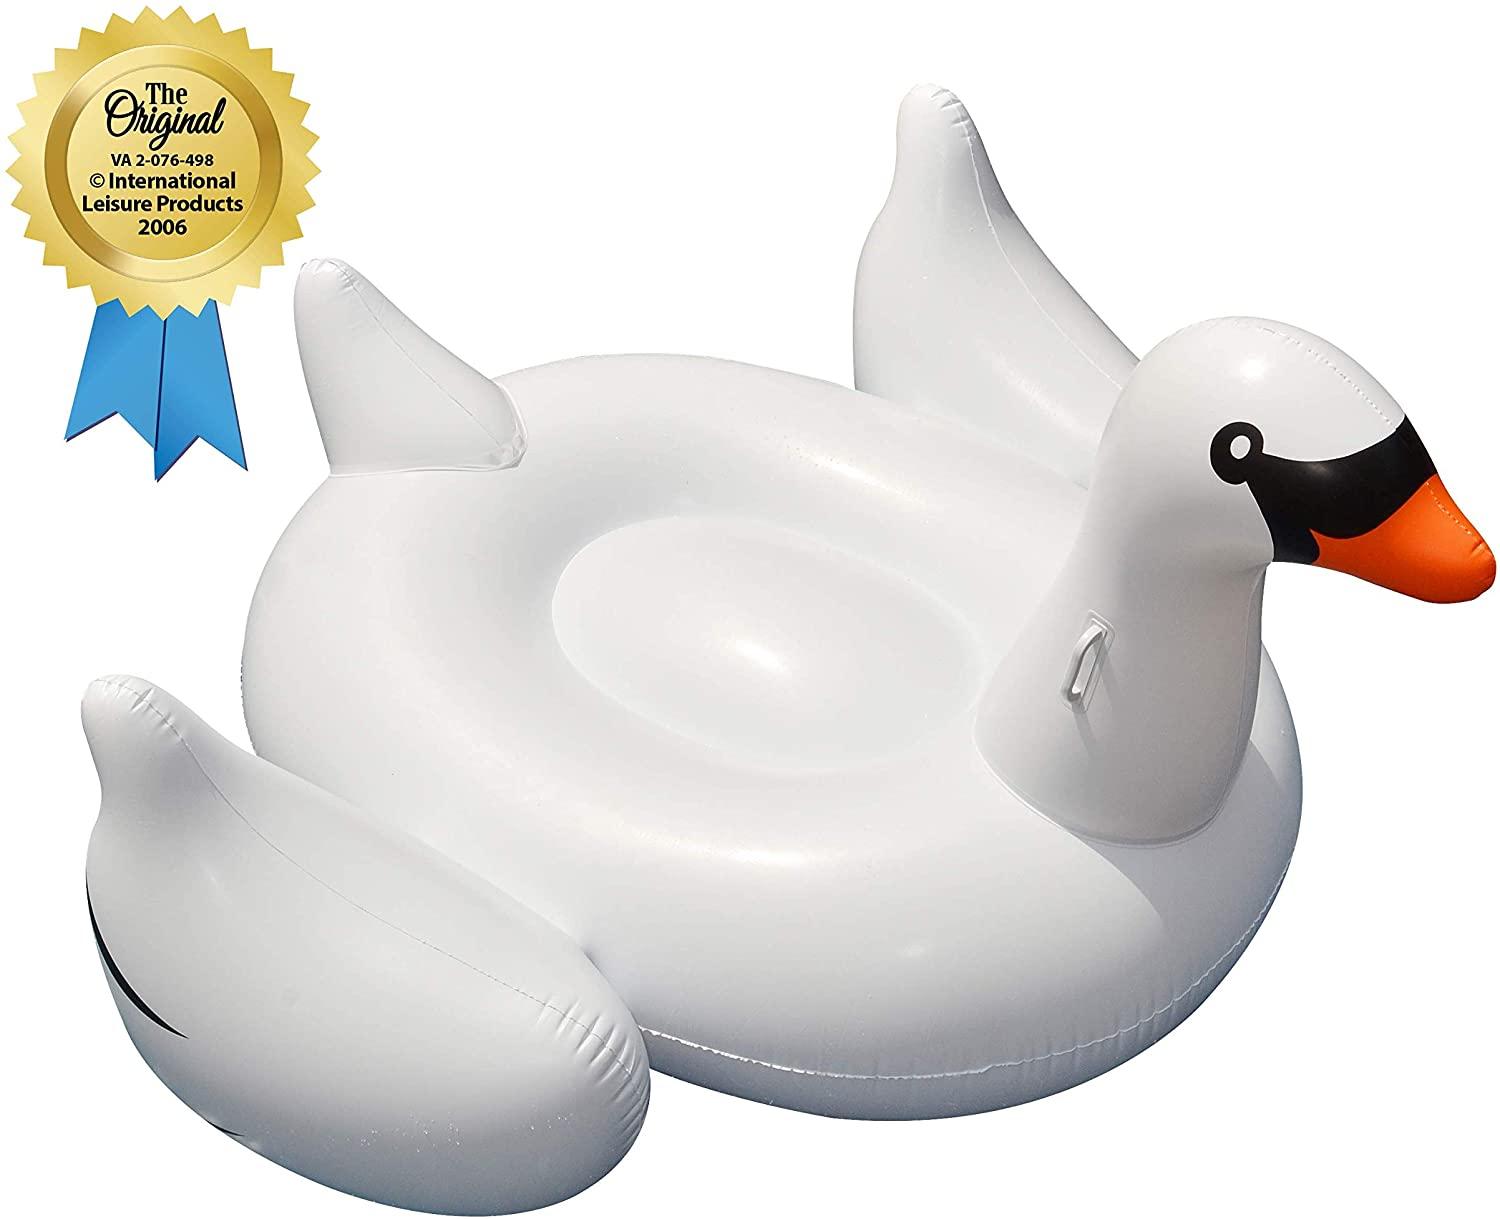 Swimline Giant Inflatable Swan Pool Float for $24.99